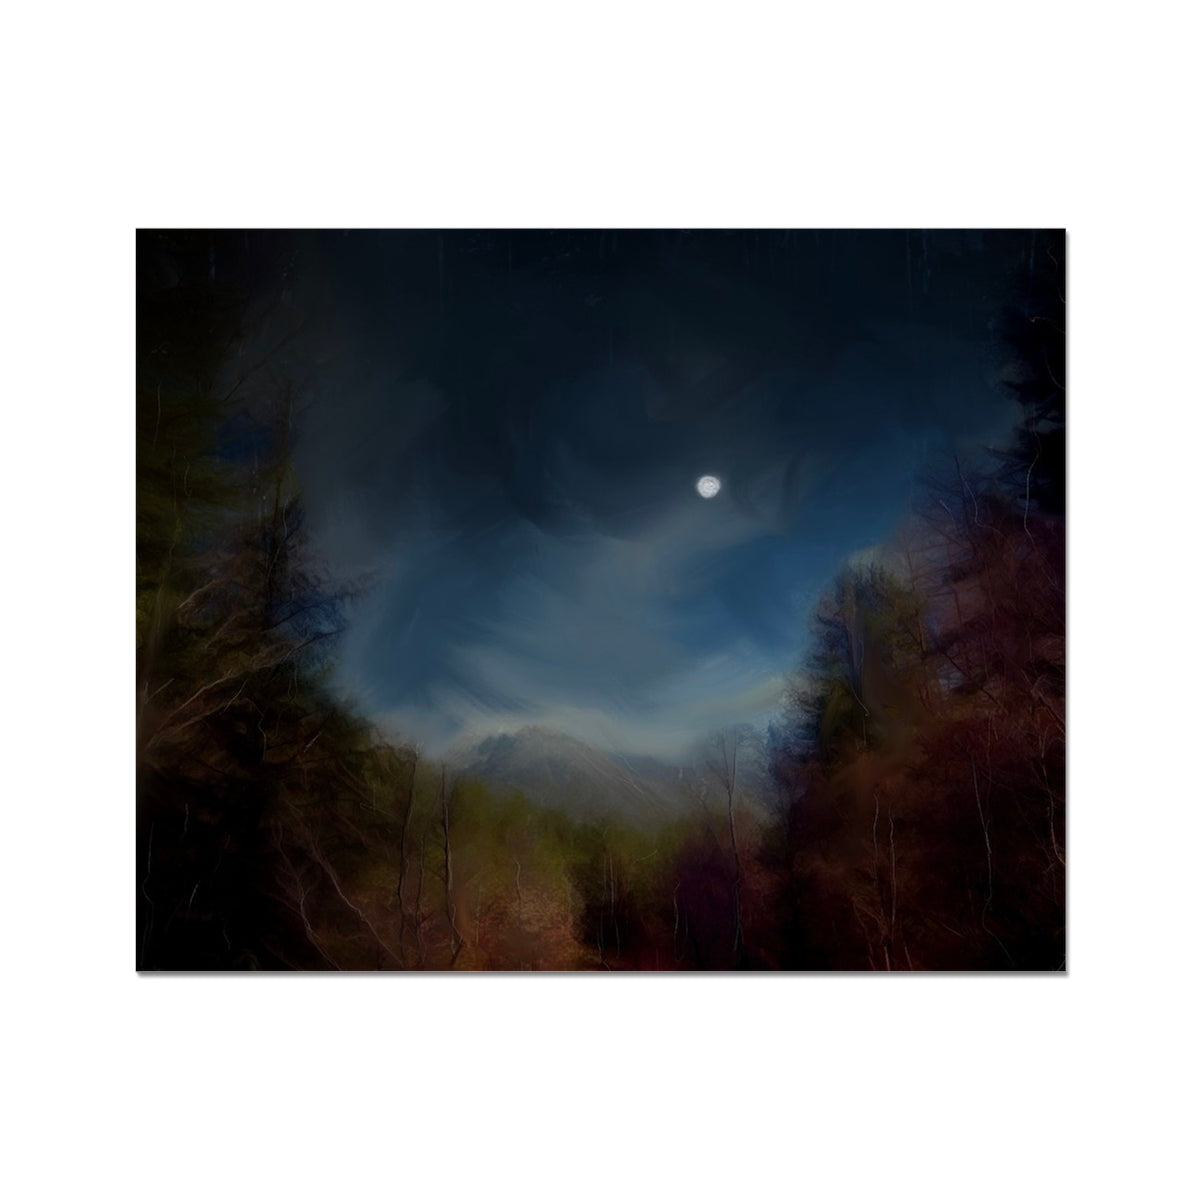 Glencoe Lochan Moonlight Painting | Artist Proof Collector Prints From Scotland-Artist Proof Collector Prints-Scottish Lochs & Mountains Art Gallery-20"x16"-Paintings, Prints, Homeware, Art Gifts From Scotland By Scottish Artist Kevin Hunter